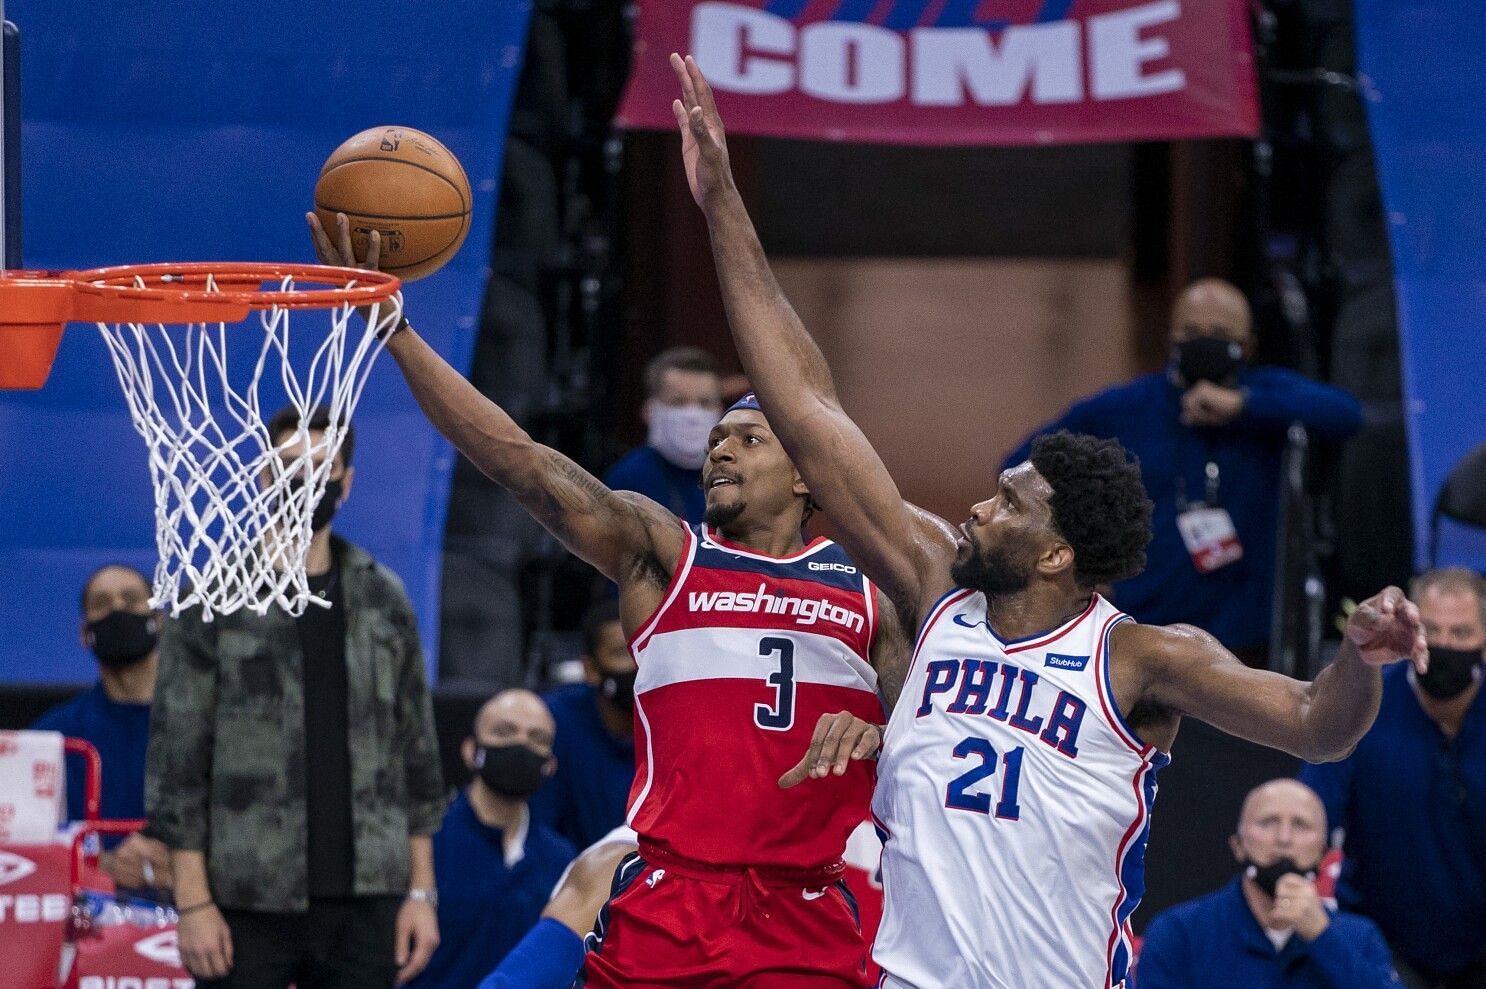 The Washington Wizards and the Philadelphia 76ers are in the thick of the fight for the East playoff seedings. [Photo: Los Angeles Times]